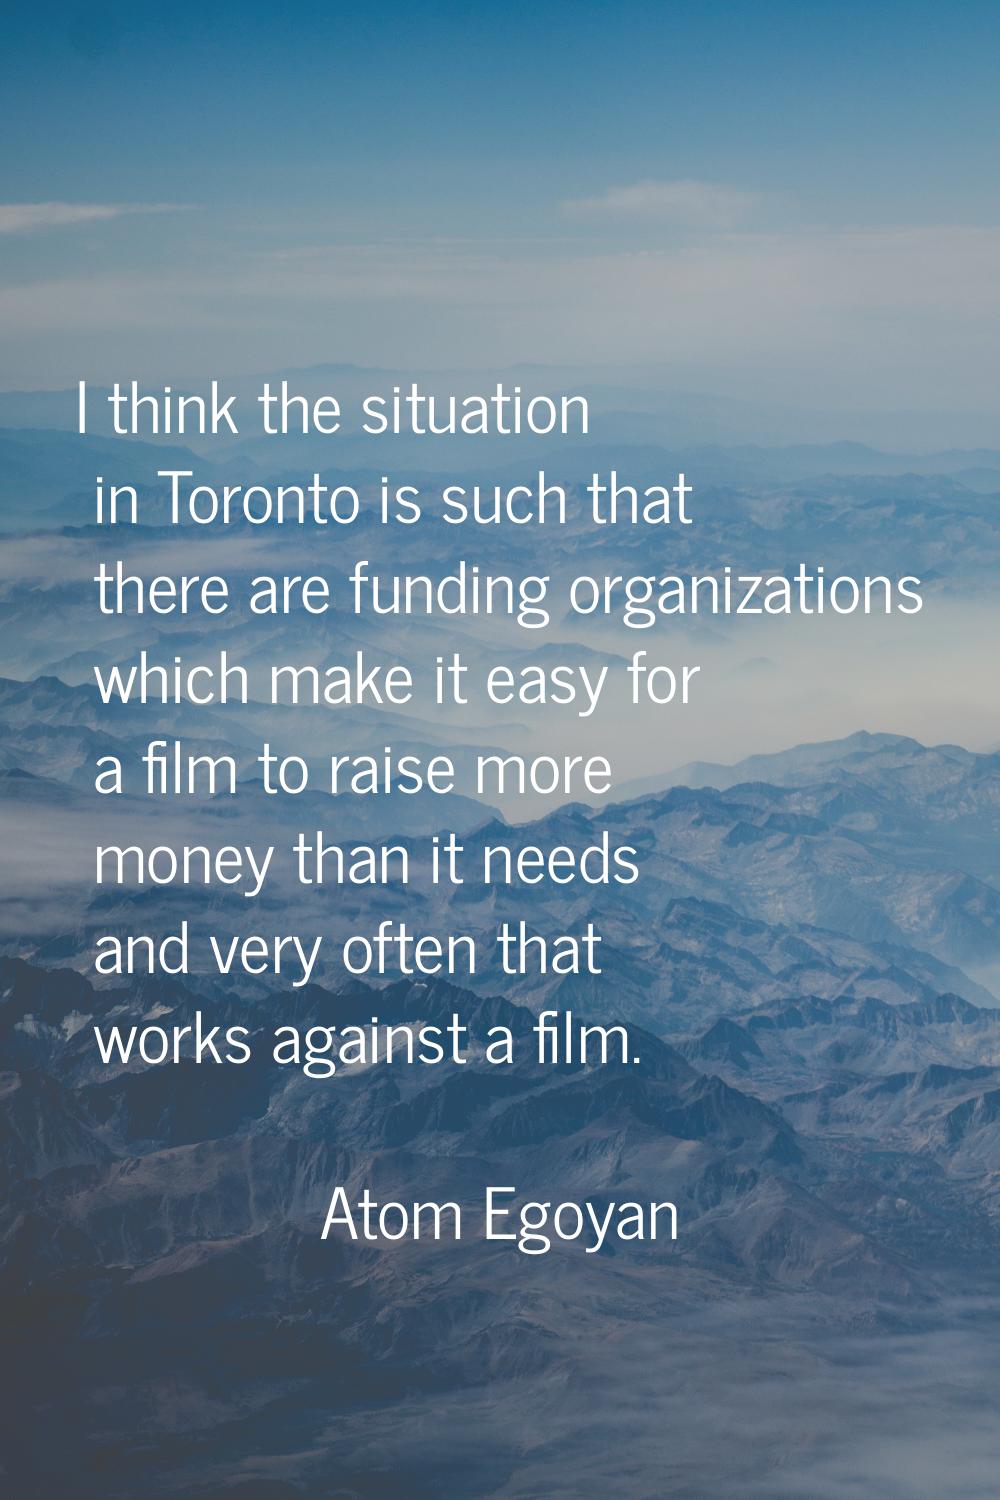 I think the situation in Toronto is such that there are funding organizations which make it easy fo